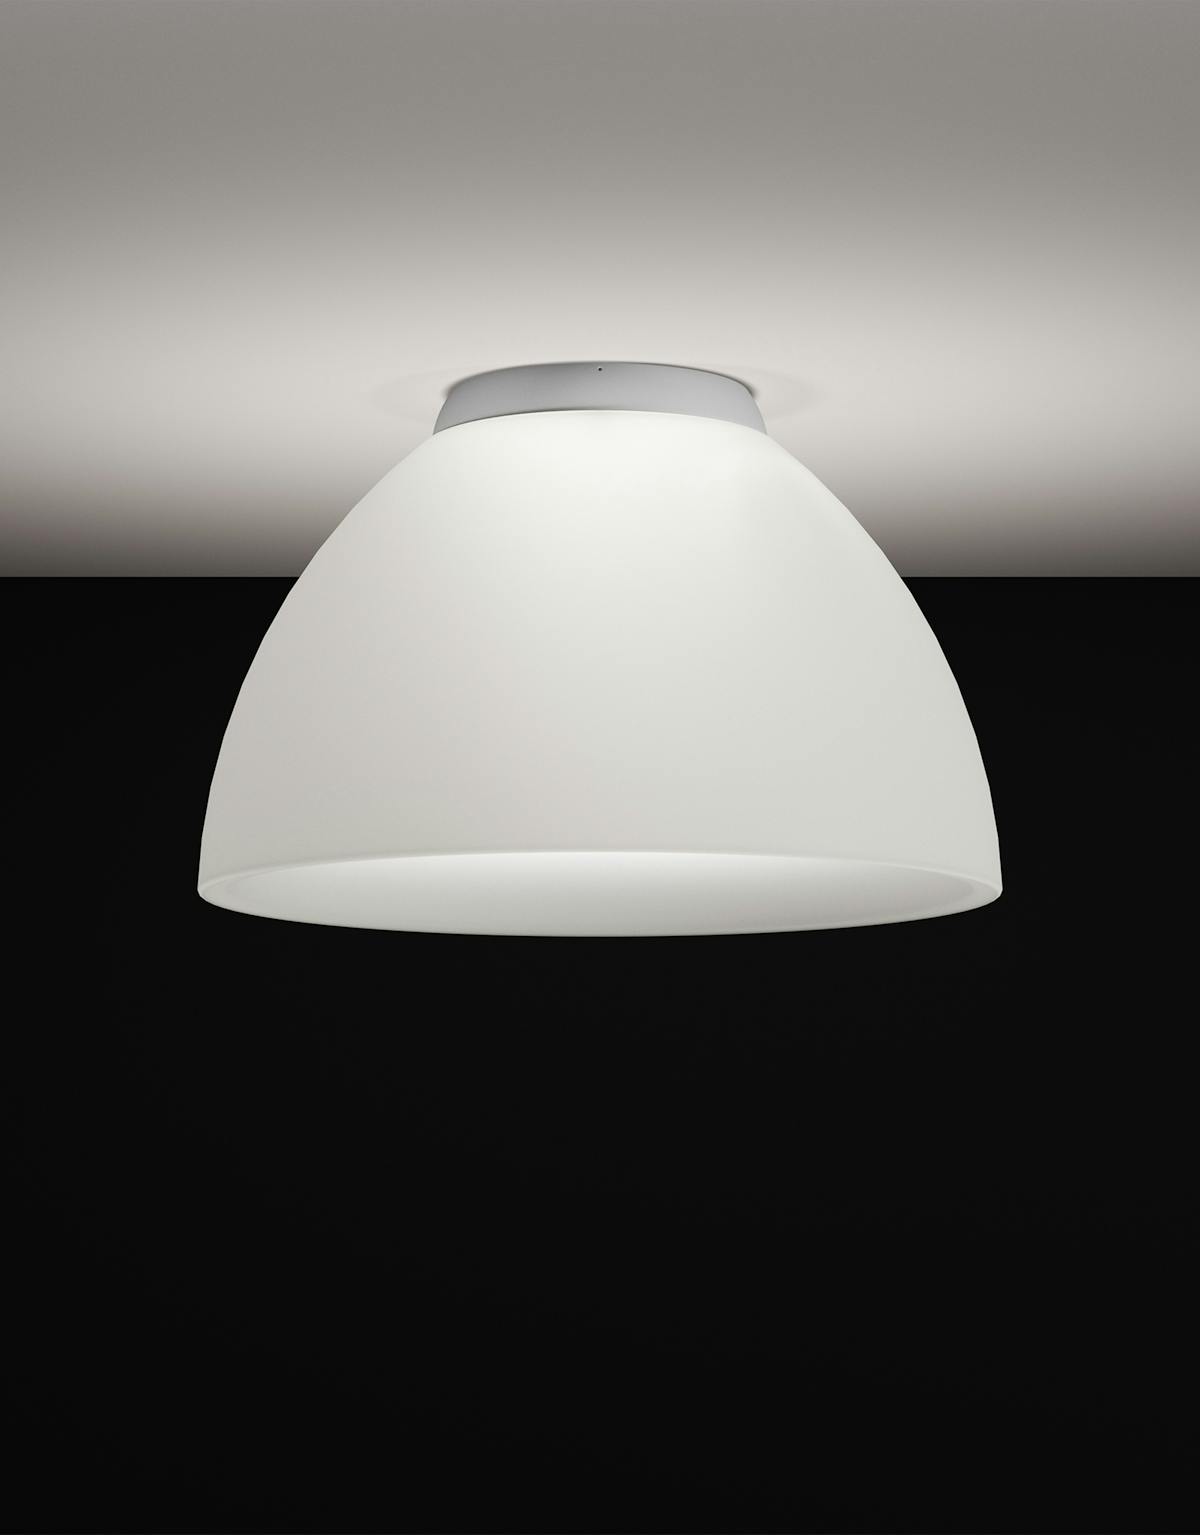 Neo, OCL Architectural Lighting